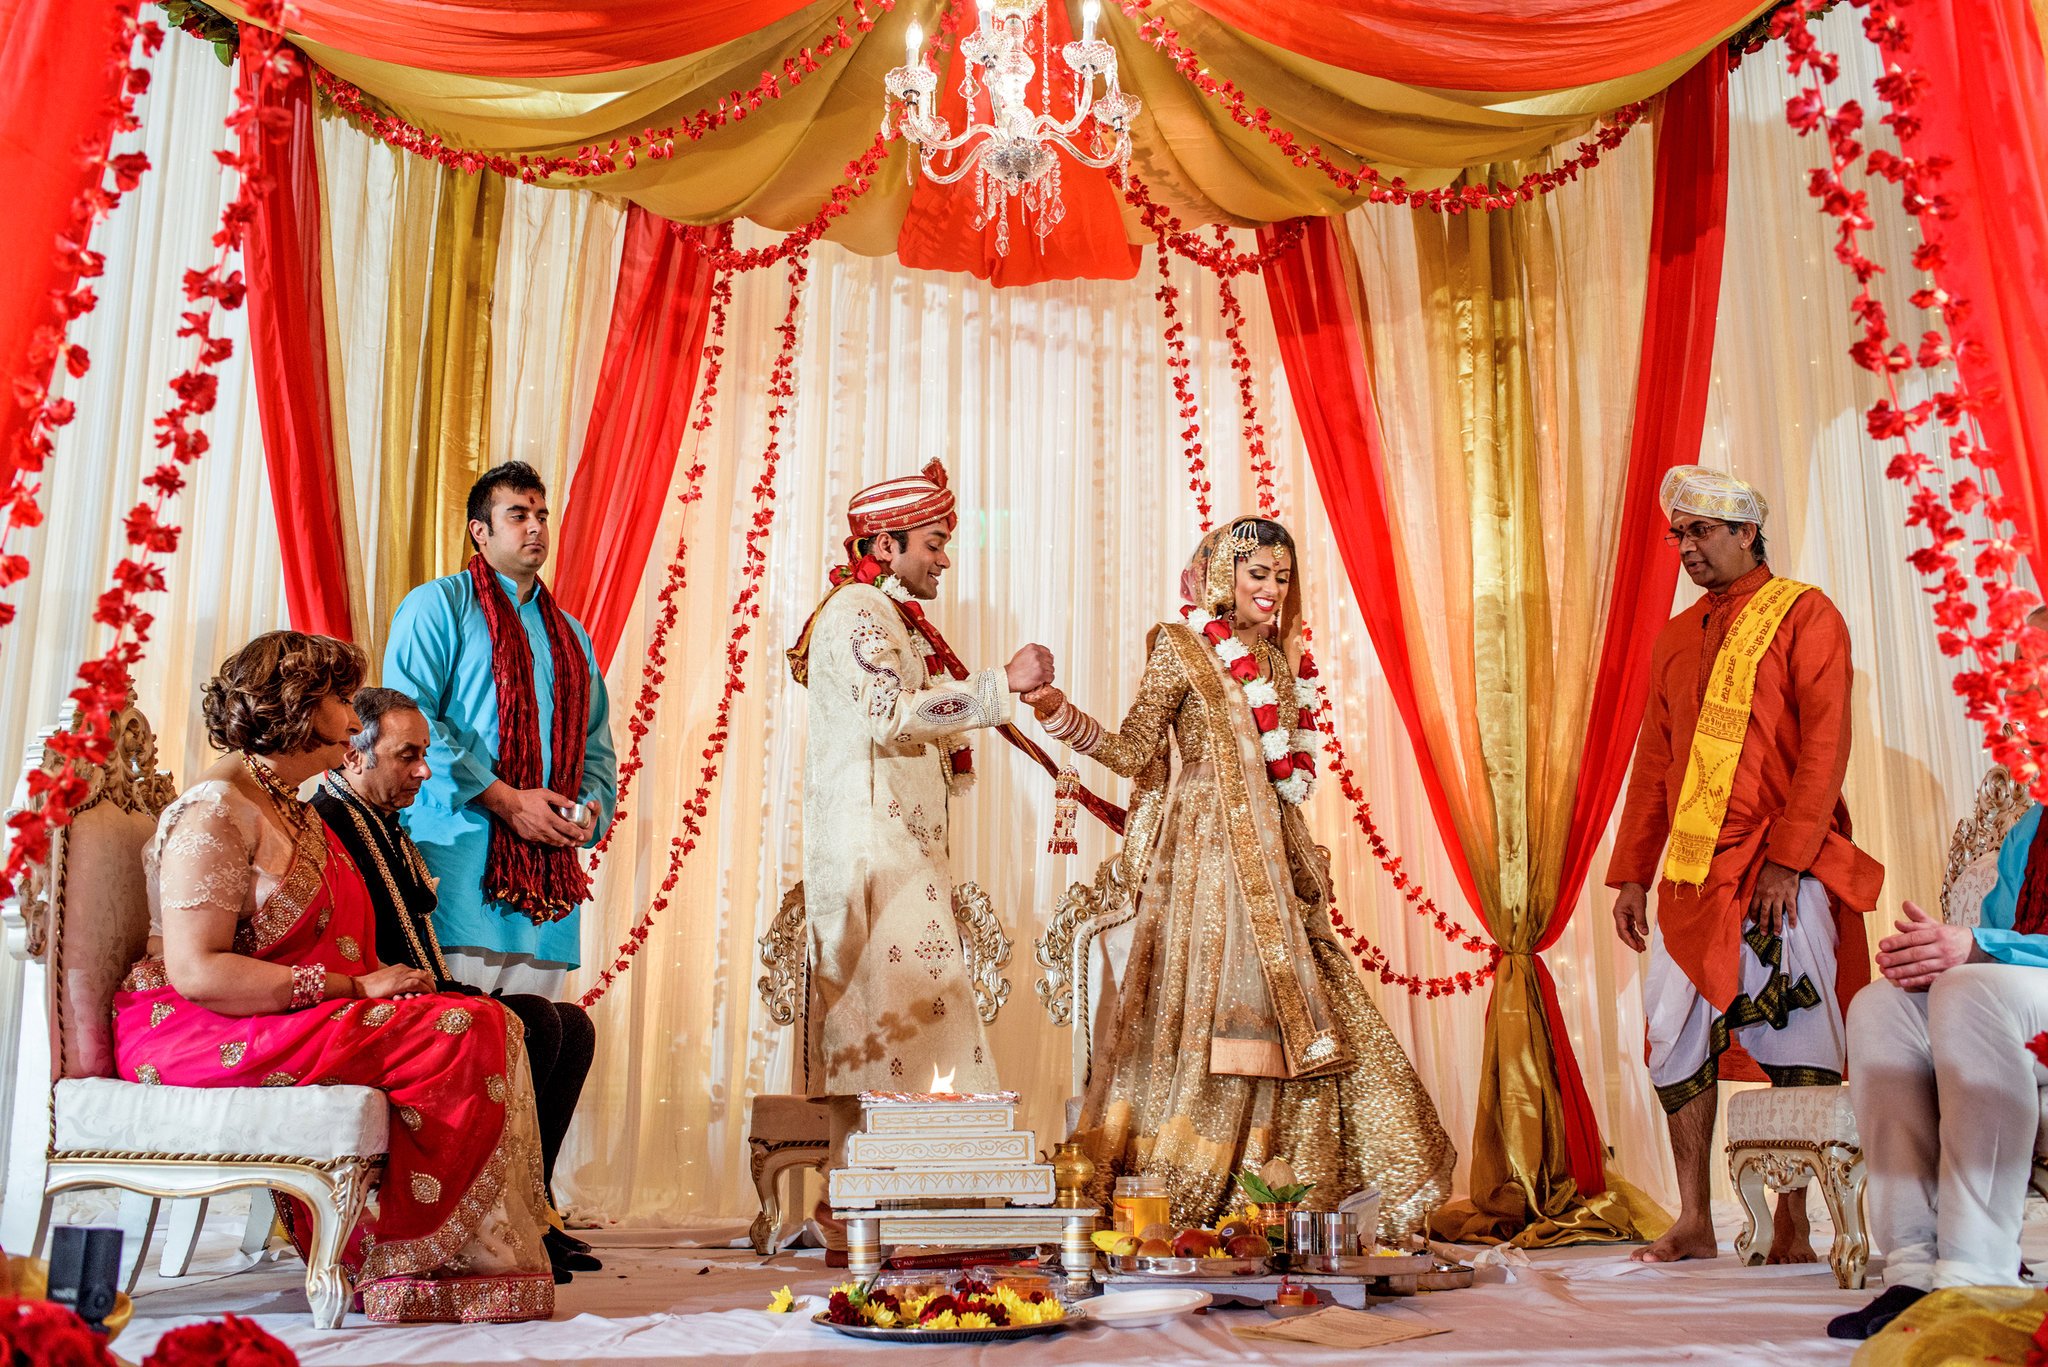 7 Vows of Hindu Marriage